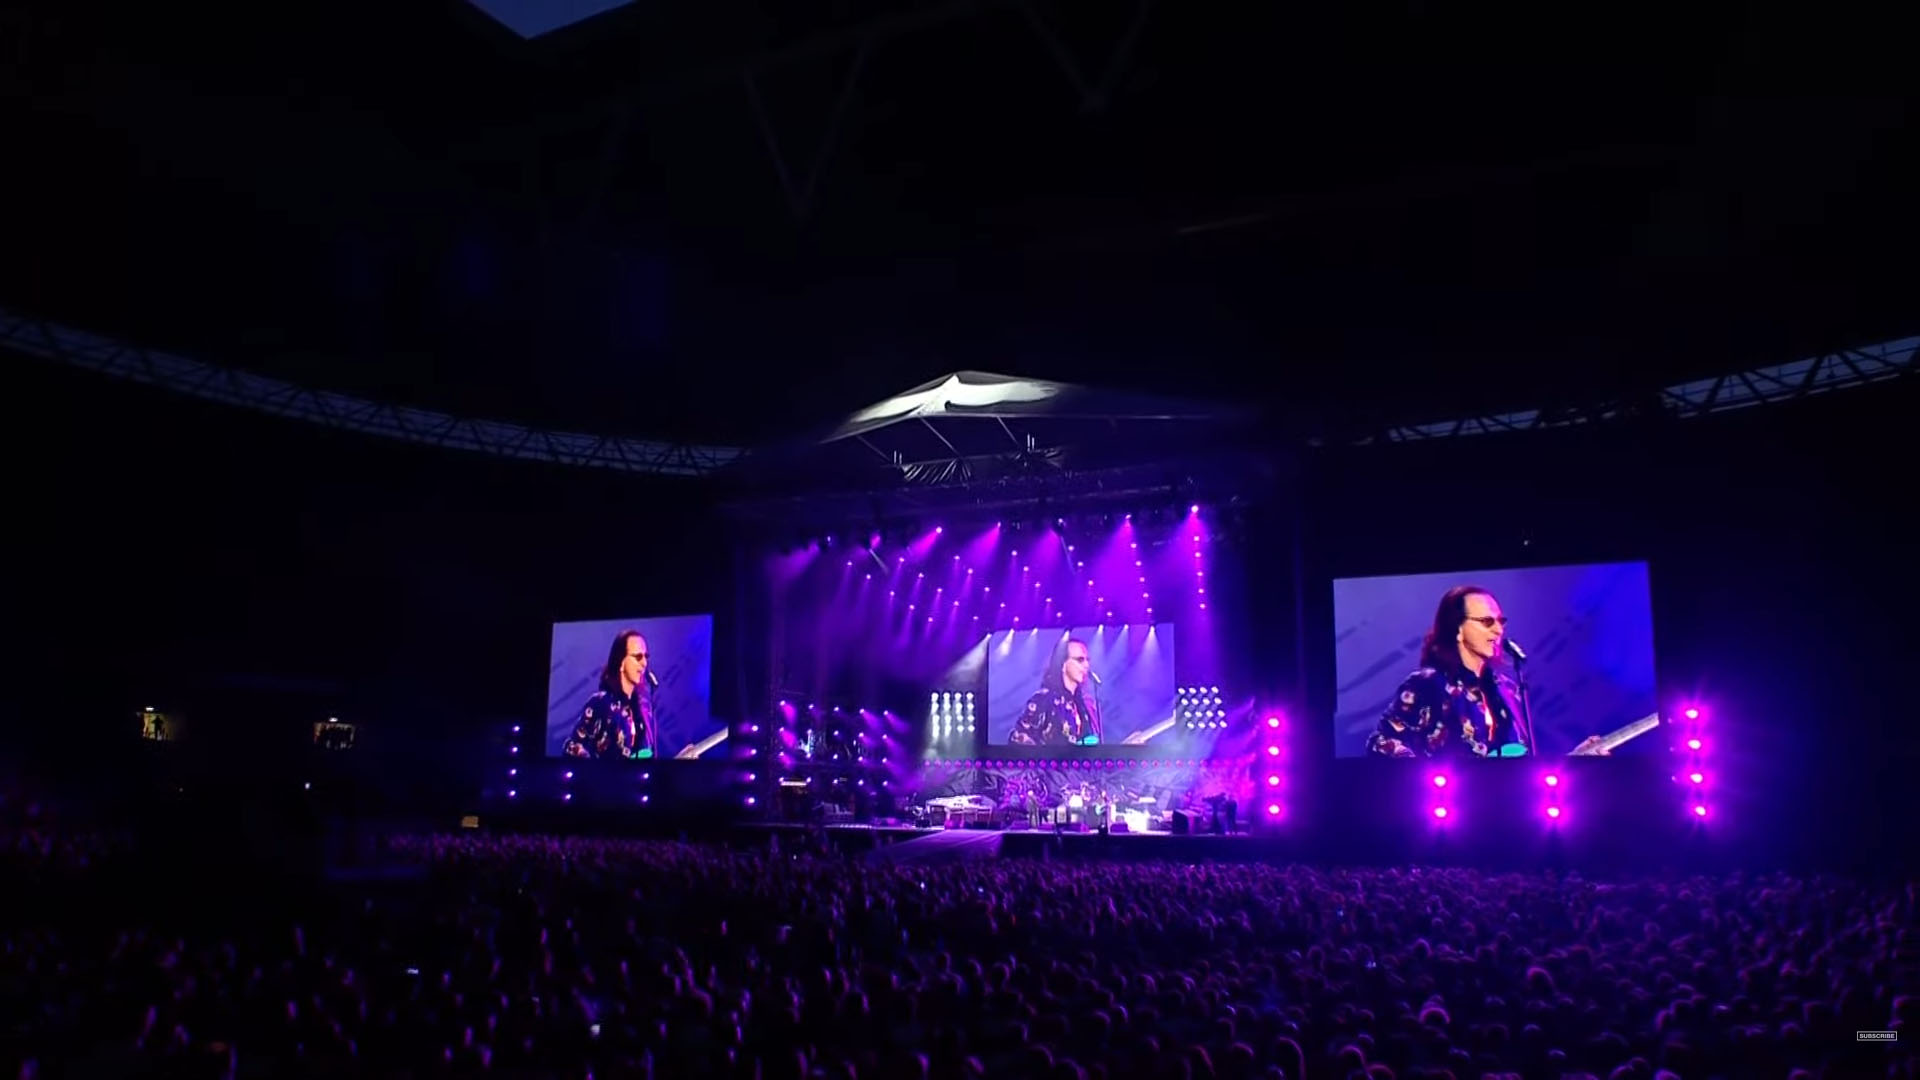 Taylor Hawkins Tribute Concert Photos - Geddy Lee and Alex Lifeson Performance - Wembley Stadium, London, England - September 3rd, 2022